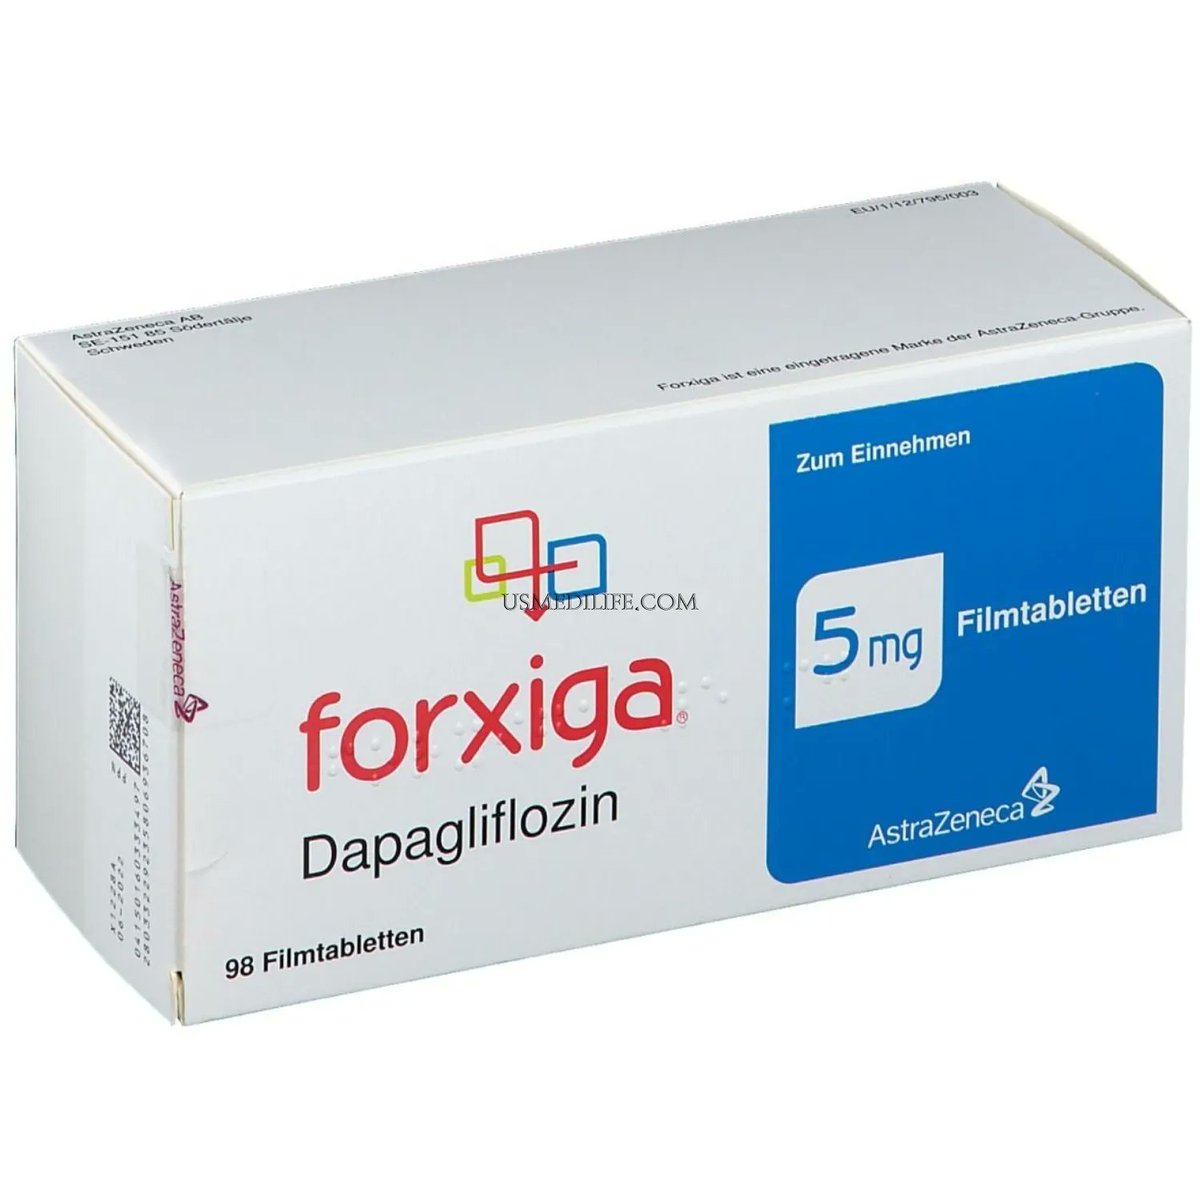 Forxiga 5mg Tablet is used alone or in combination with other medicines to treat type 2 diabetes mellitus.

#buyForxiga #Forxiga5mg #diabetesmedication #healthcare #pharmacy #prescriptiondrugs #onlinepharmacy #diabetesawareness
usmedilife.com/product/forxig…